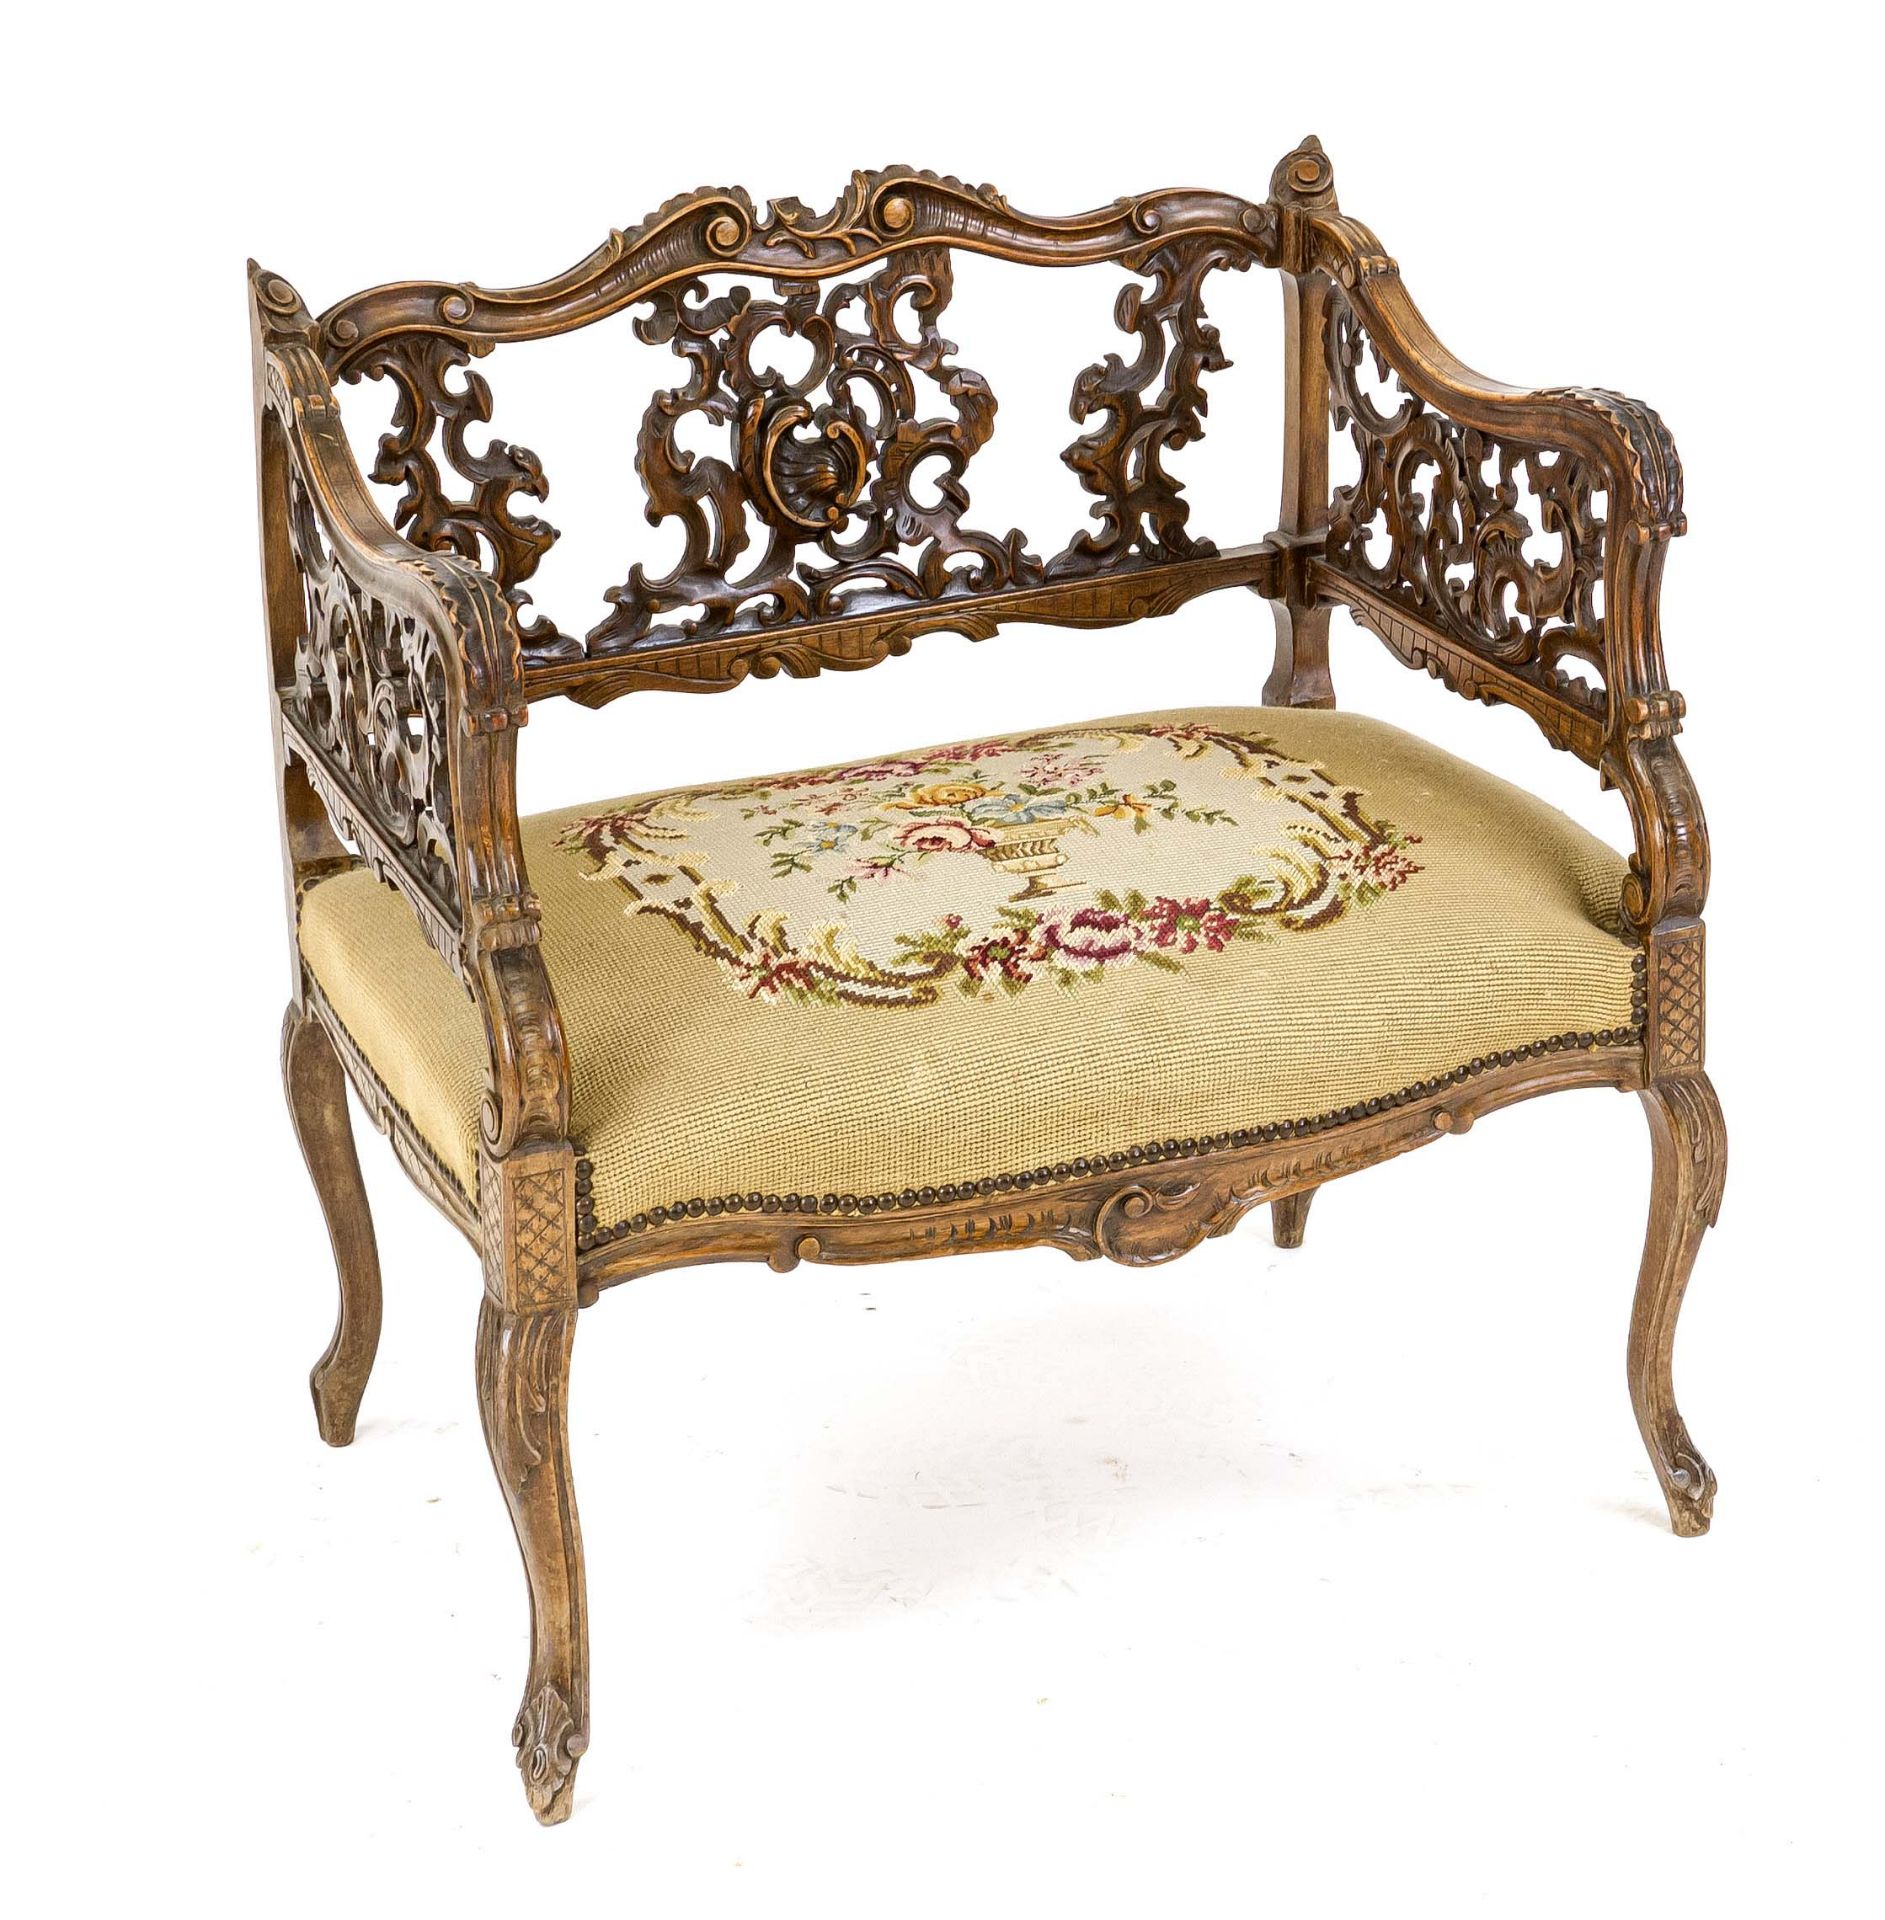 Salon chair, 19th century, walnut, heavily openwork carved sides and back on curved legs, tapestry